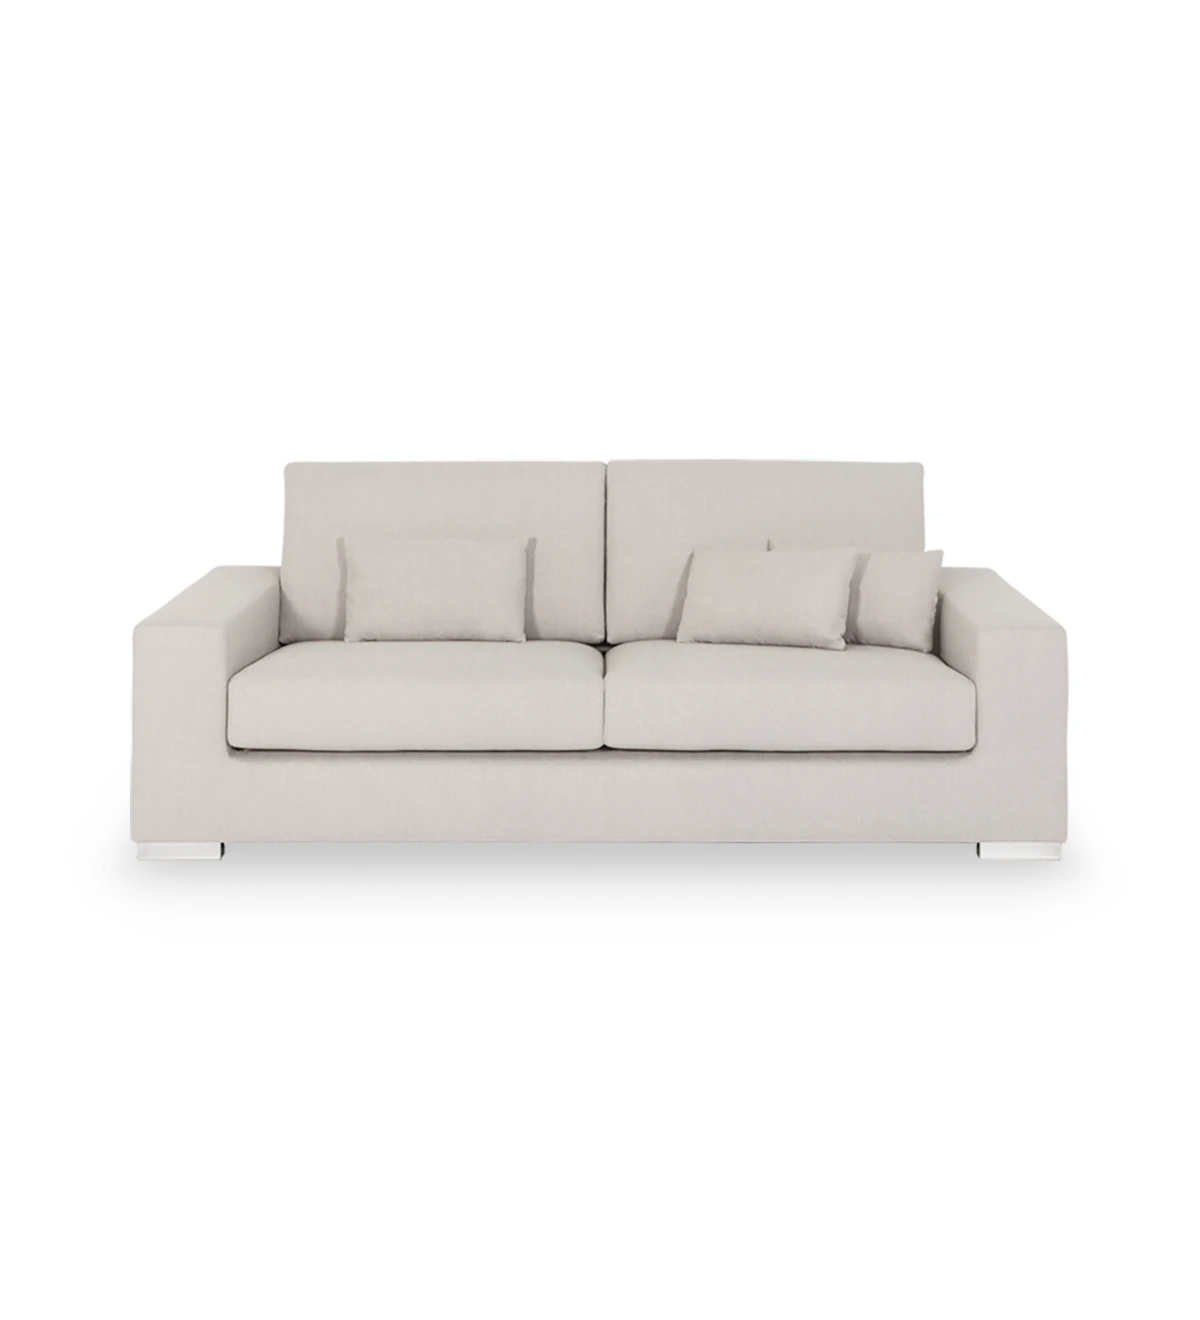 Geneve 3-seater sofa upholstered in pearl fabric, 224 cm.